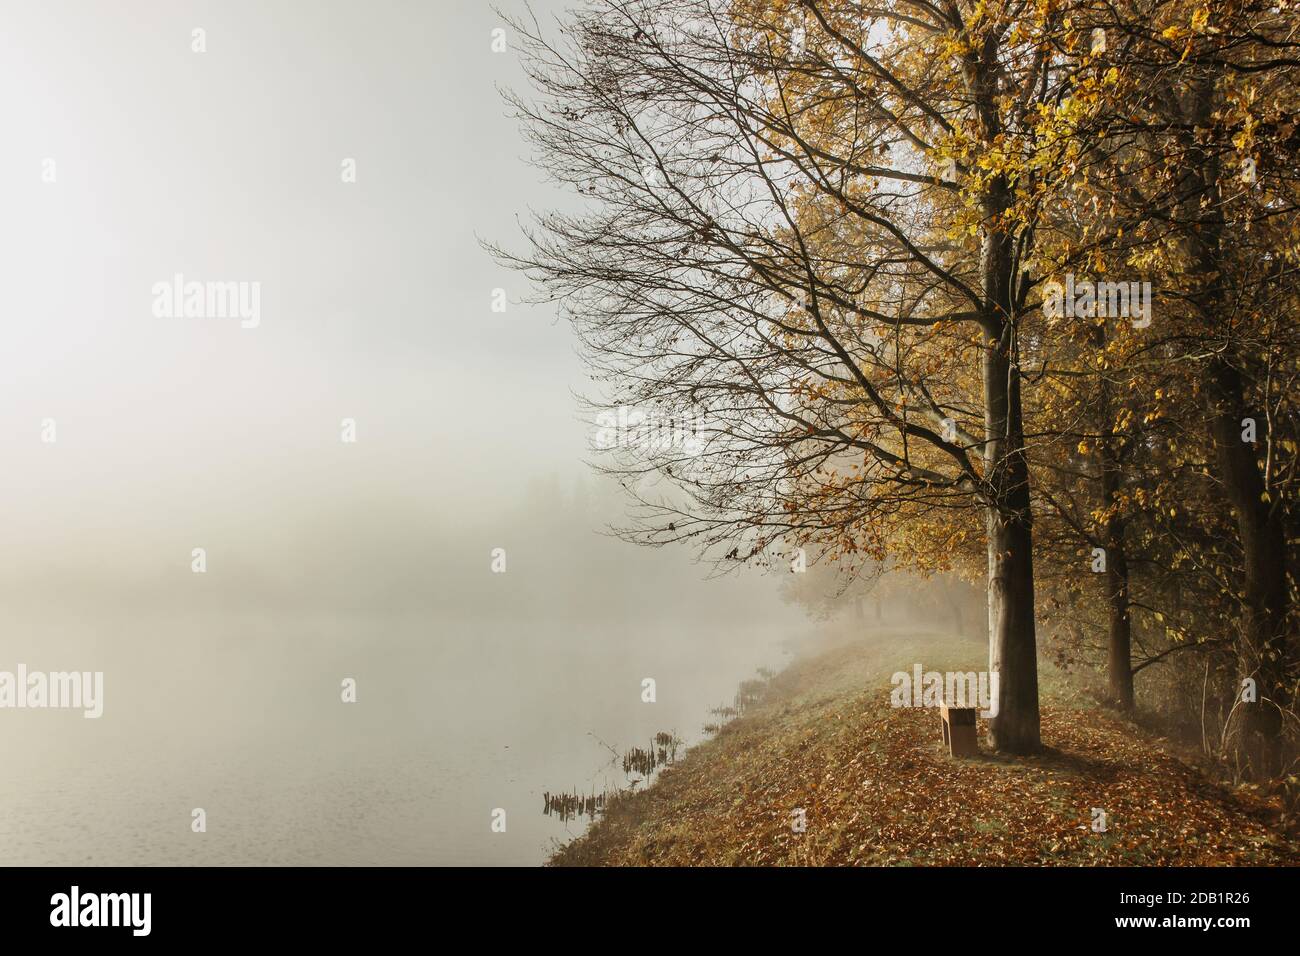 Misty autumn morning in the countryside. Autumn fall nature colors. Foggy morning outdoors. Colorful trees, fog and water. Speechless place. Nobody. R Stock Photo